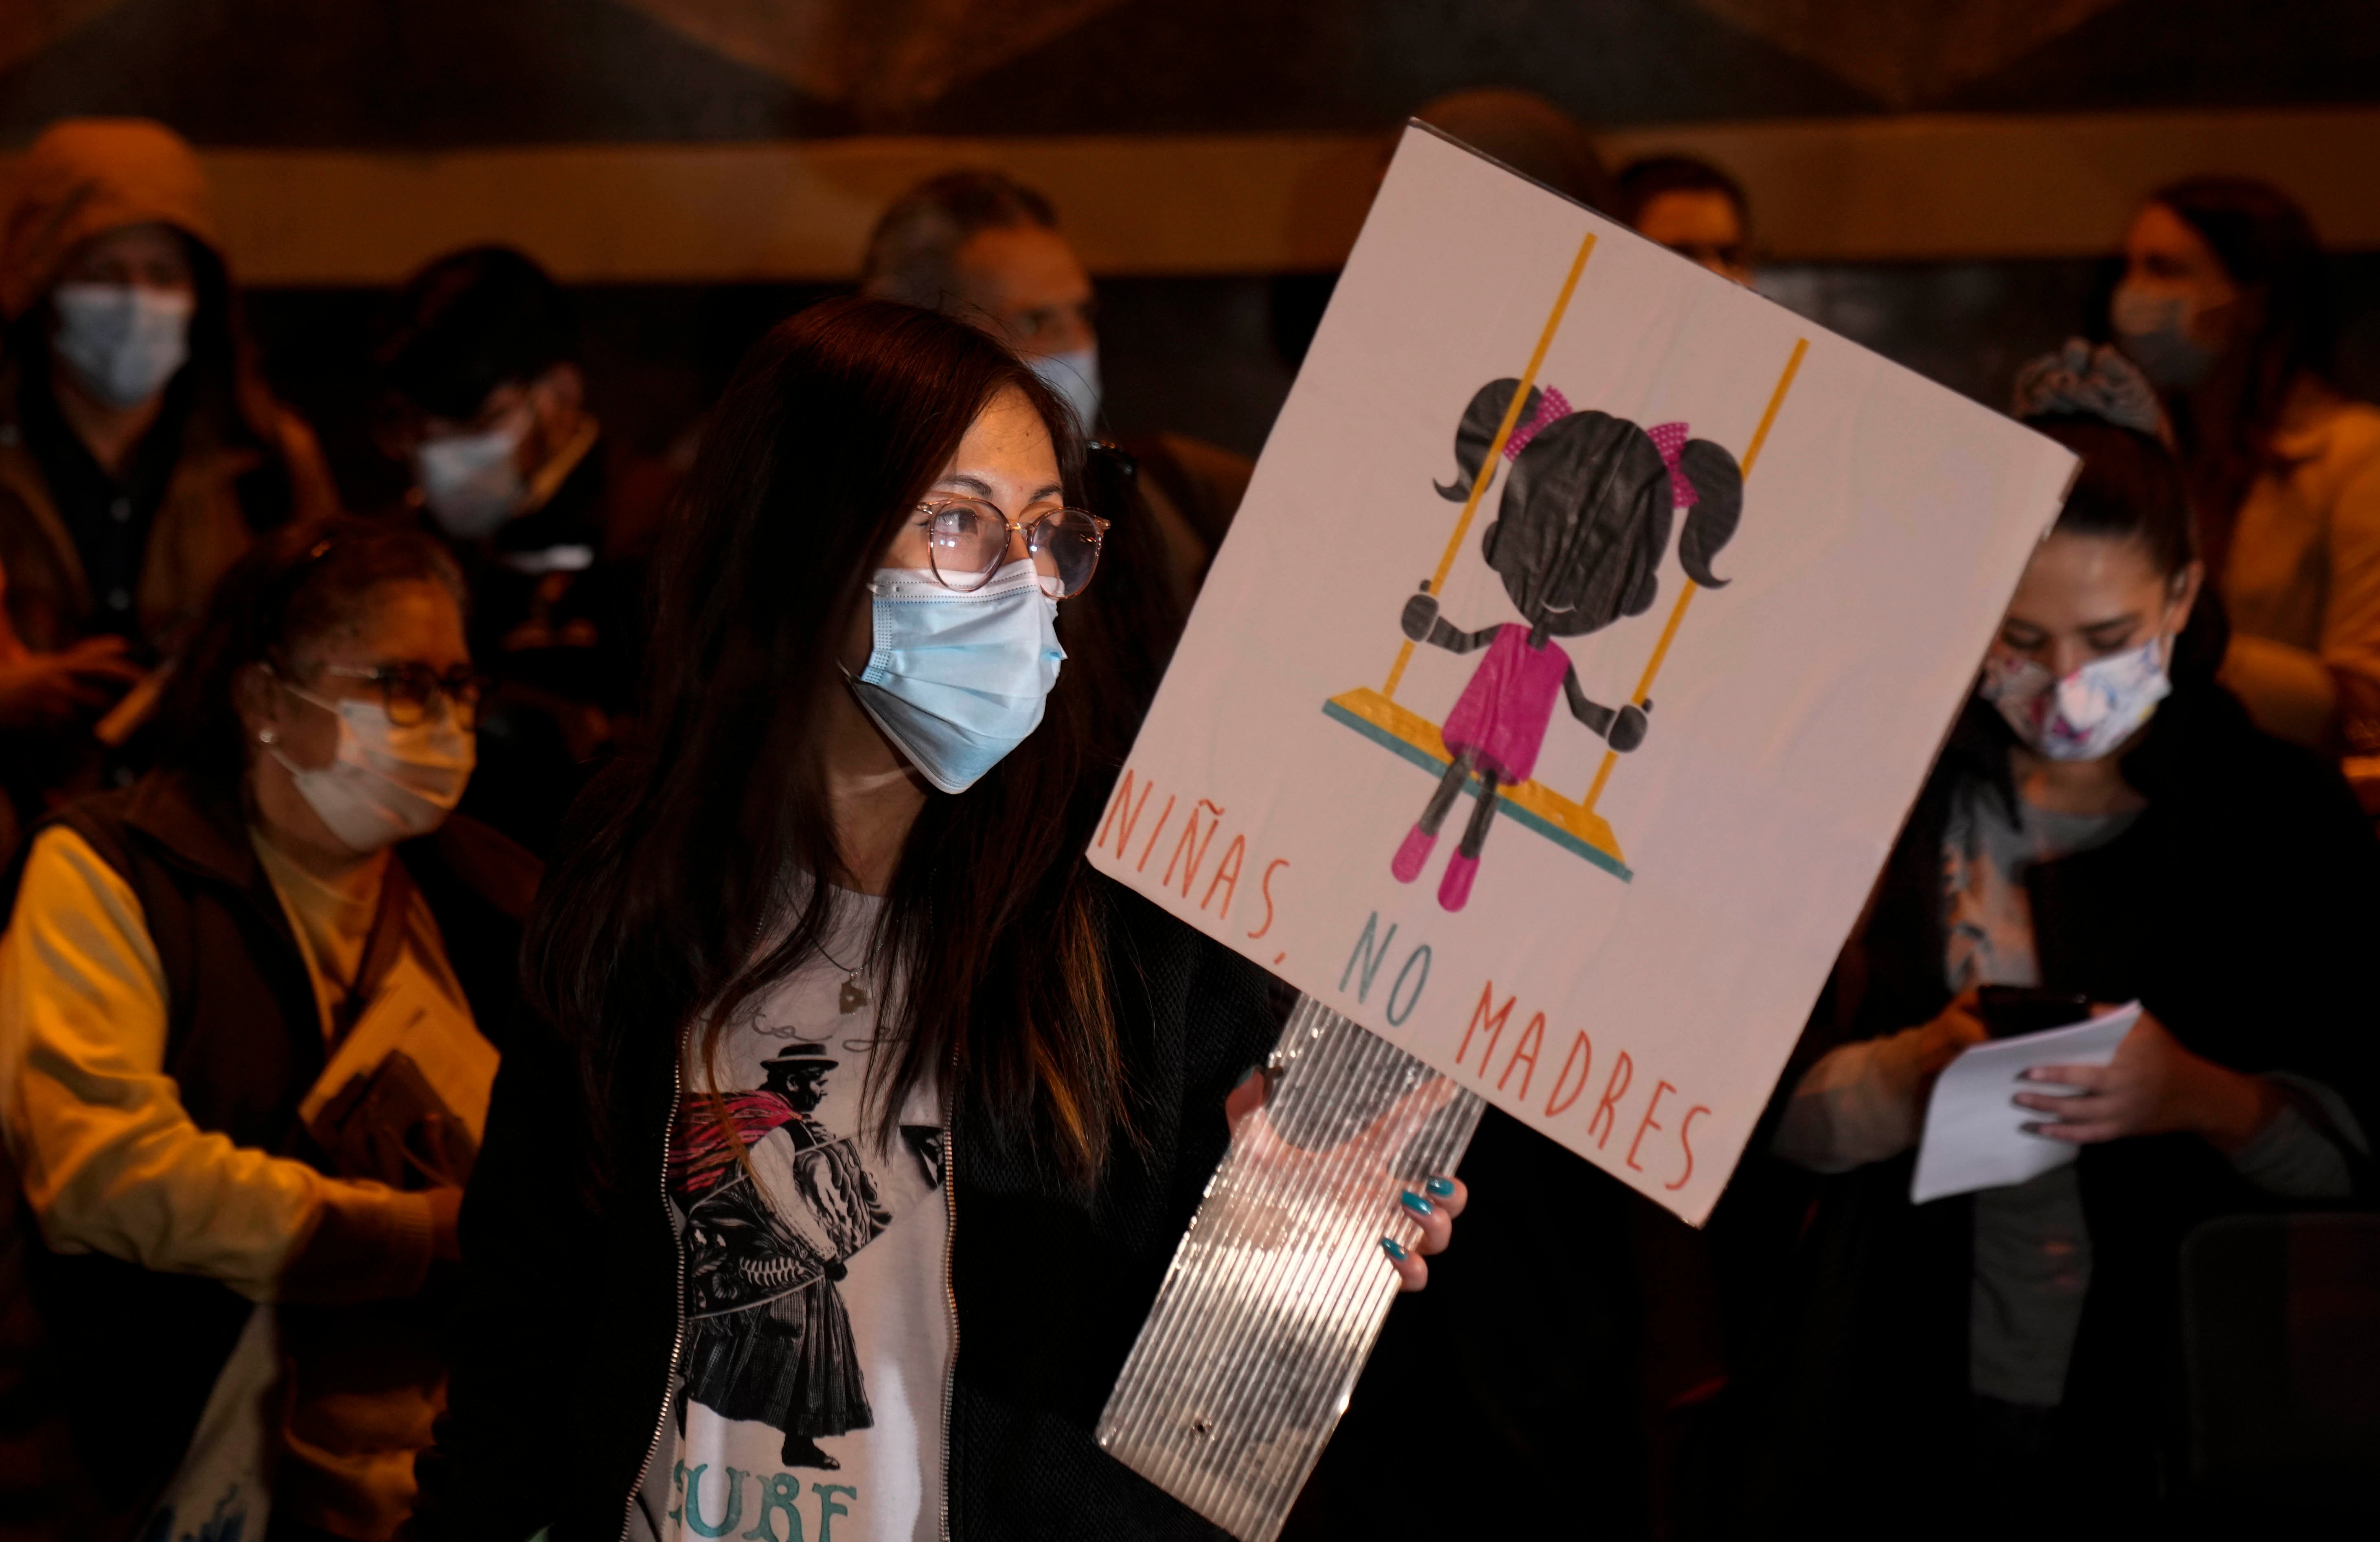 A woman holds a banner that reads in Spanish "Girls, not mothers," during a demonstration calling for sexual and reproductive rights in La Paz, Bolivia, on Oct. 27, 2021. The case of an 11-year-old girl who became pregnant after repeatedly being raped by a family member rekindled the debate on abortion in Bolivia.